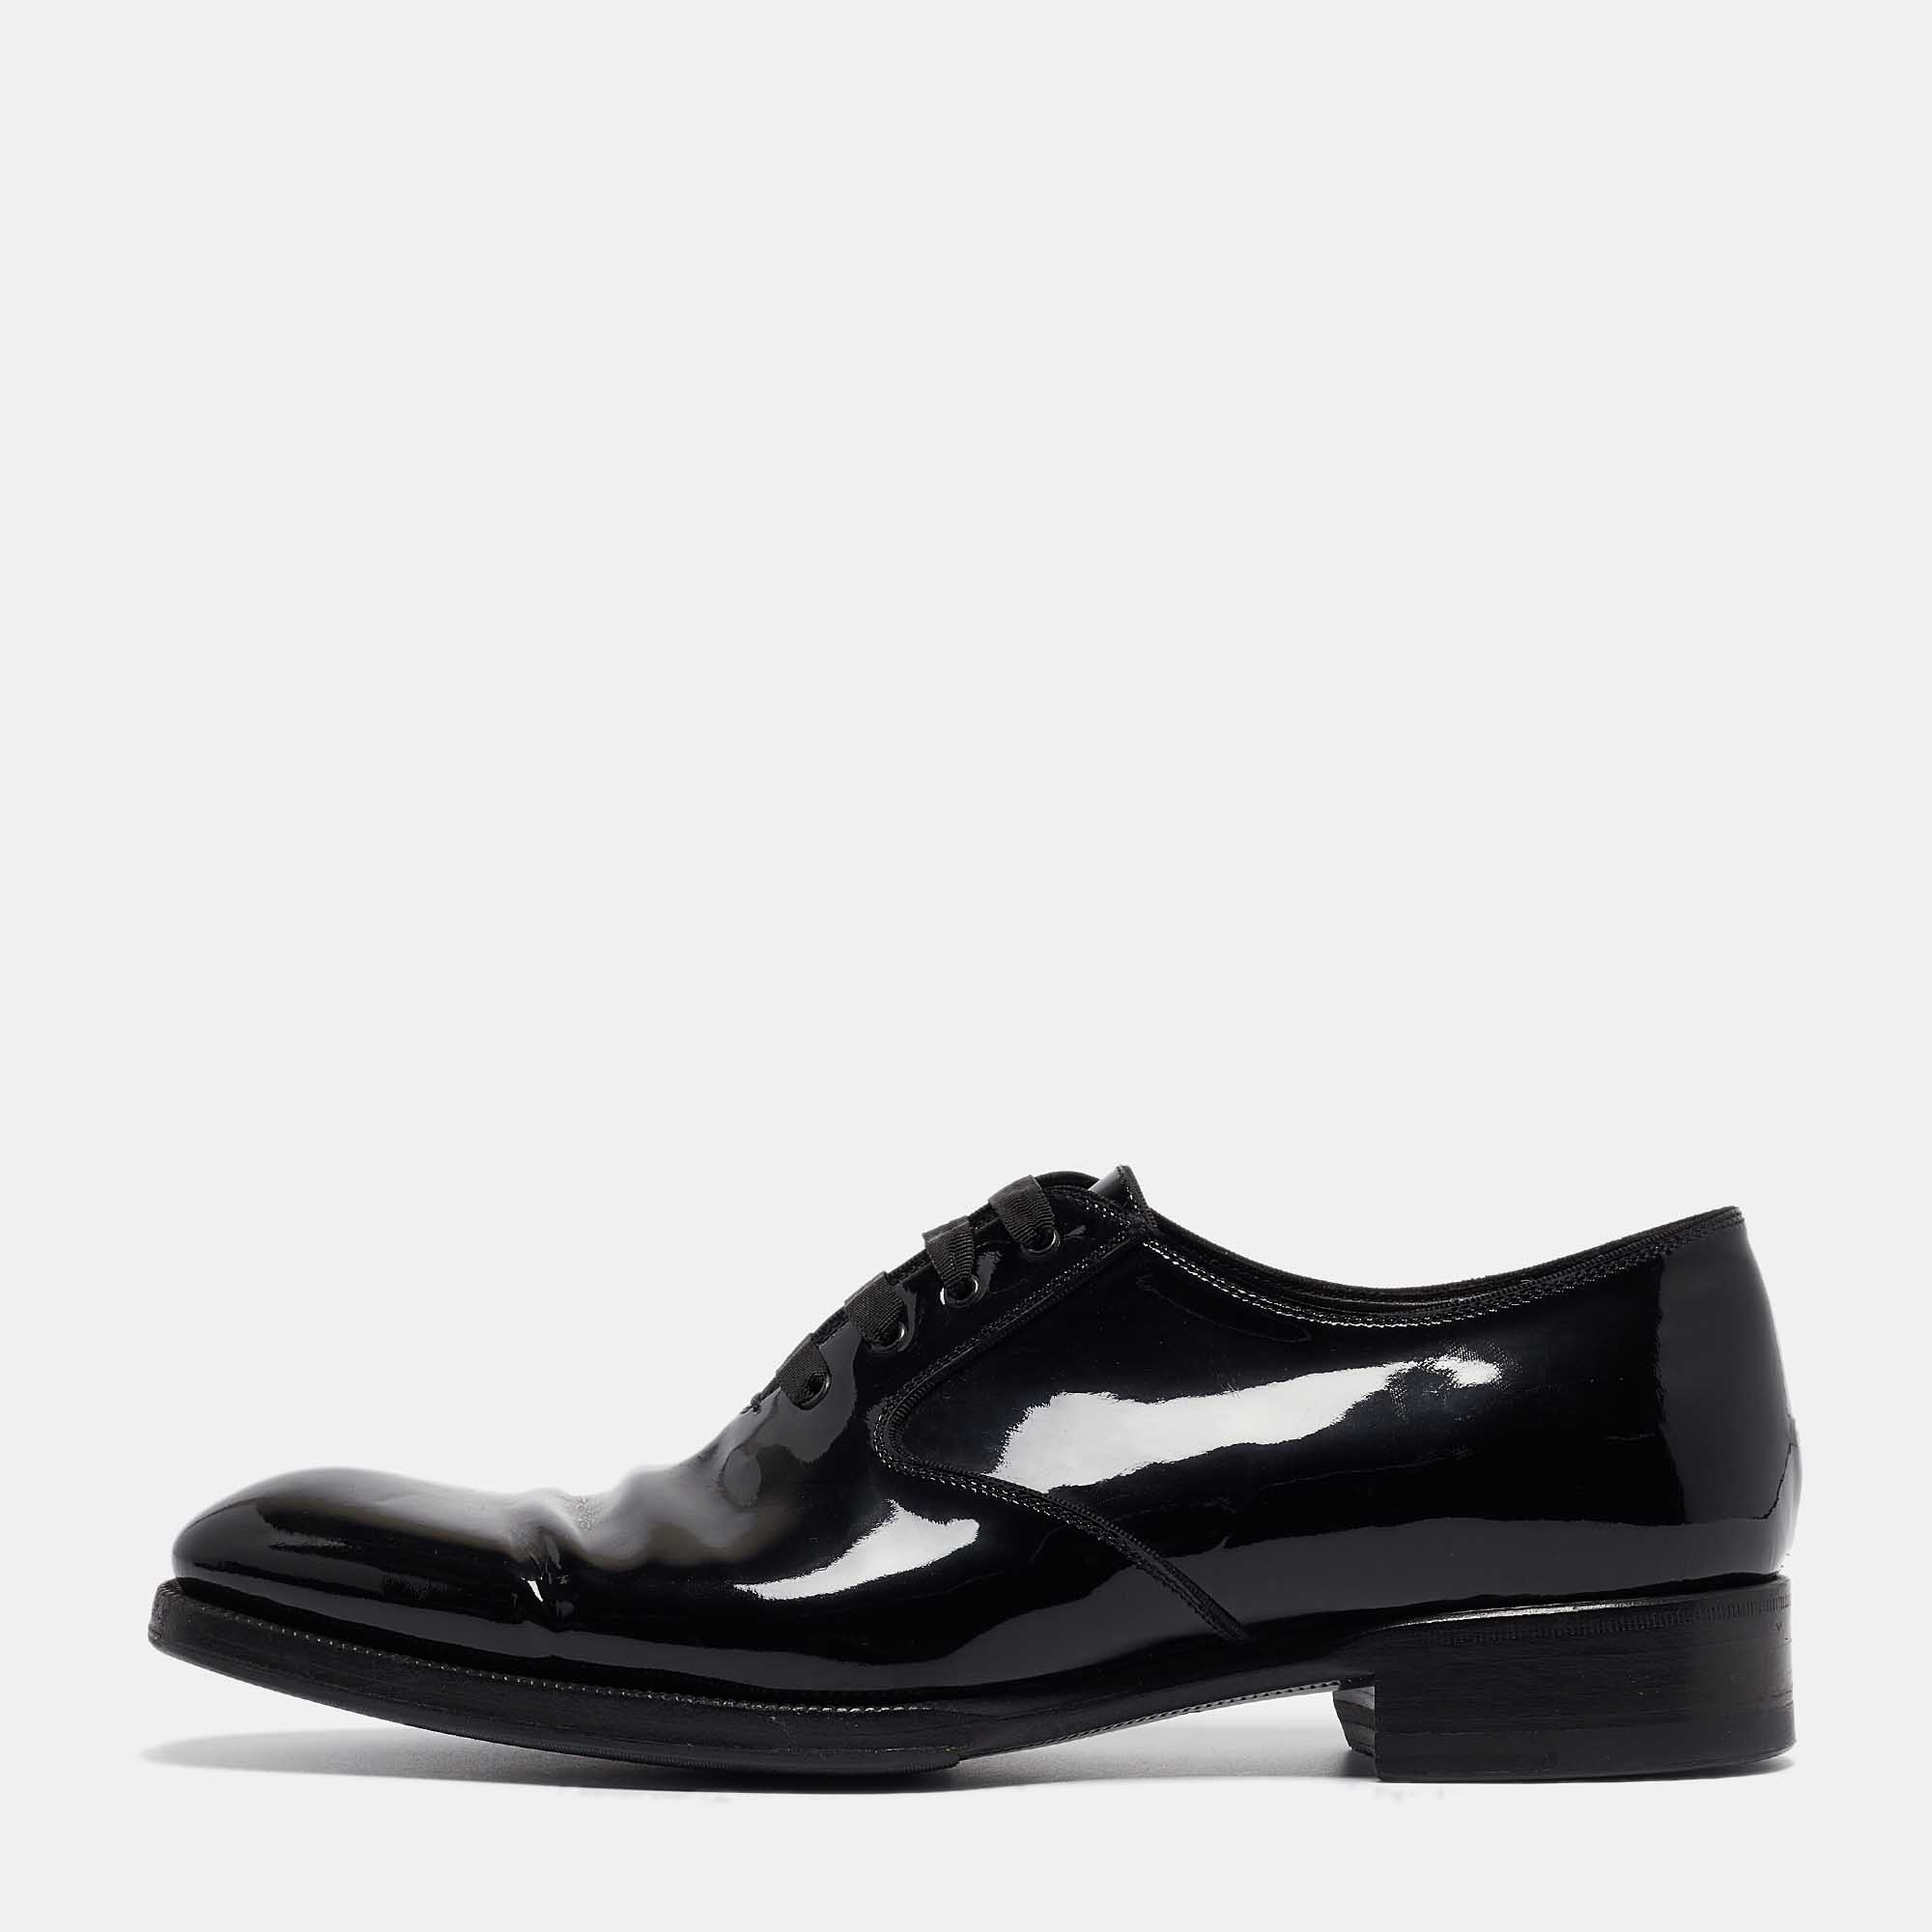 

Tom Ford Black Patent Leather Lace Up Oxfords Size